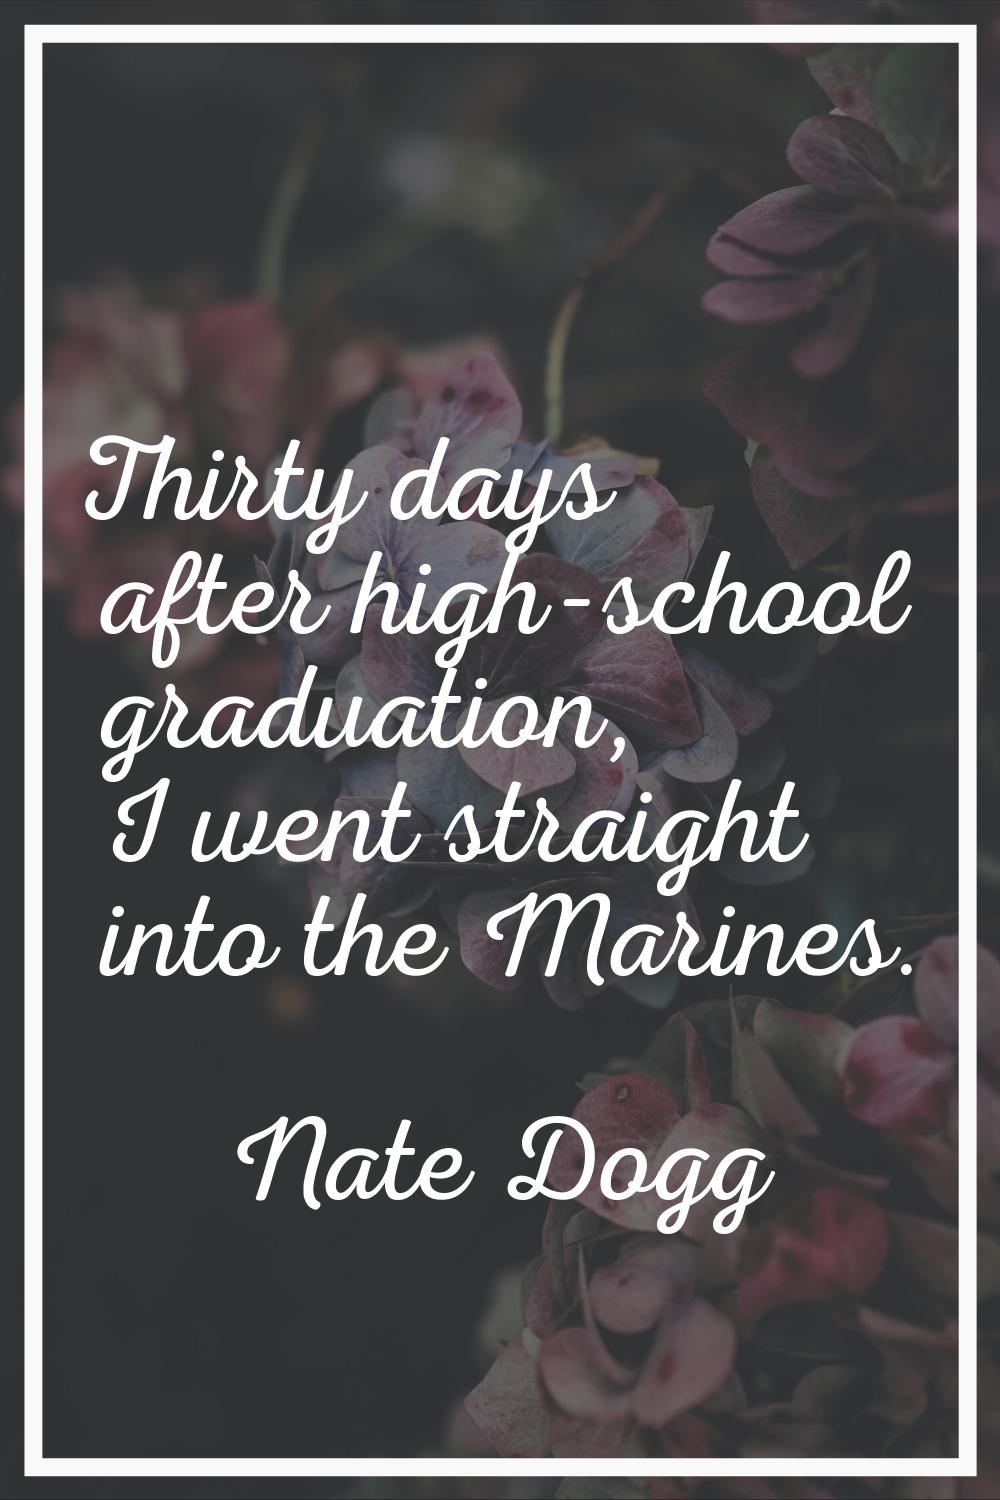 Thirty days after high-school graduation, I went straight into the Marines.